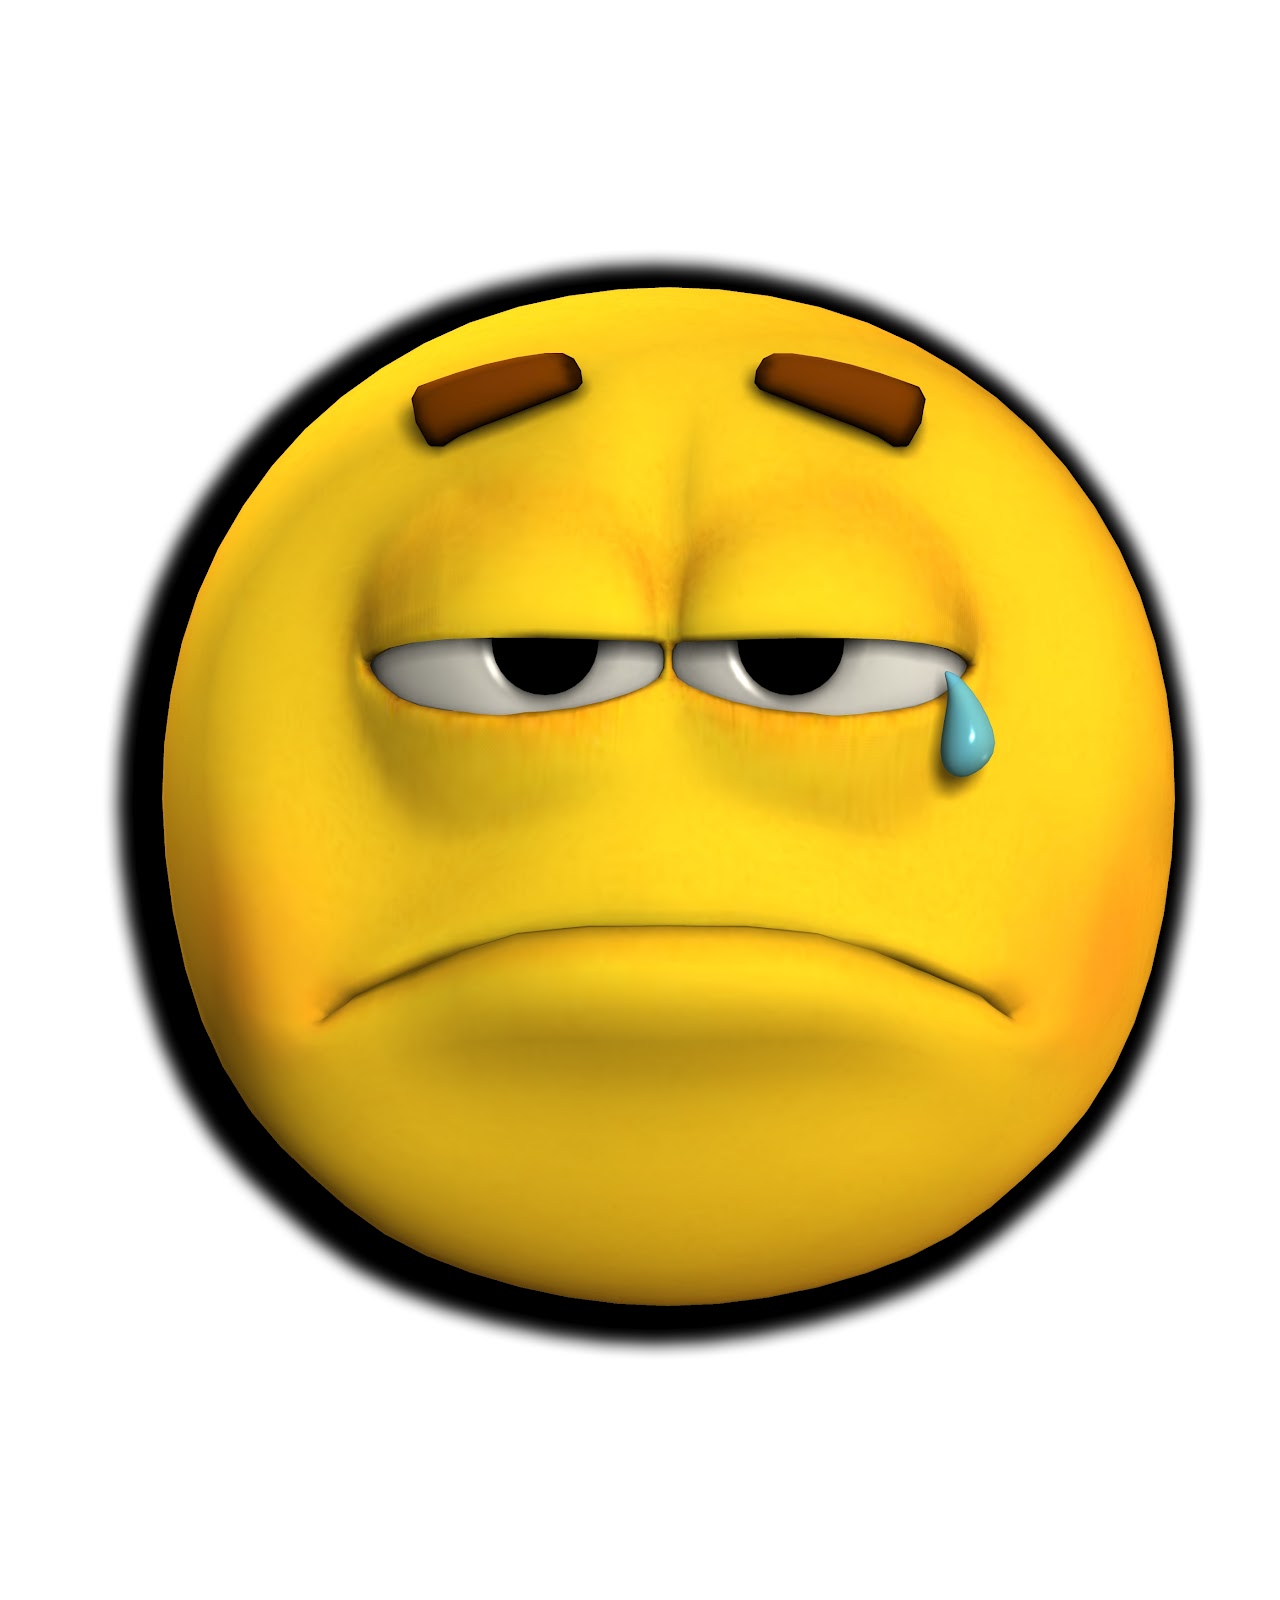 Image Of A Sad Face - Clipart library